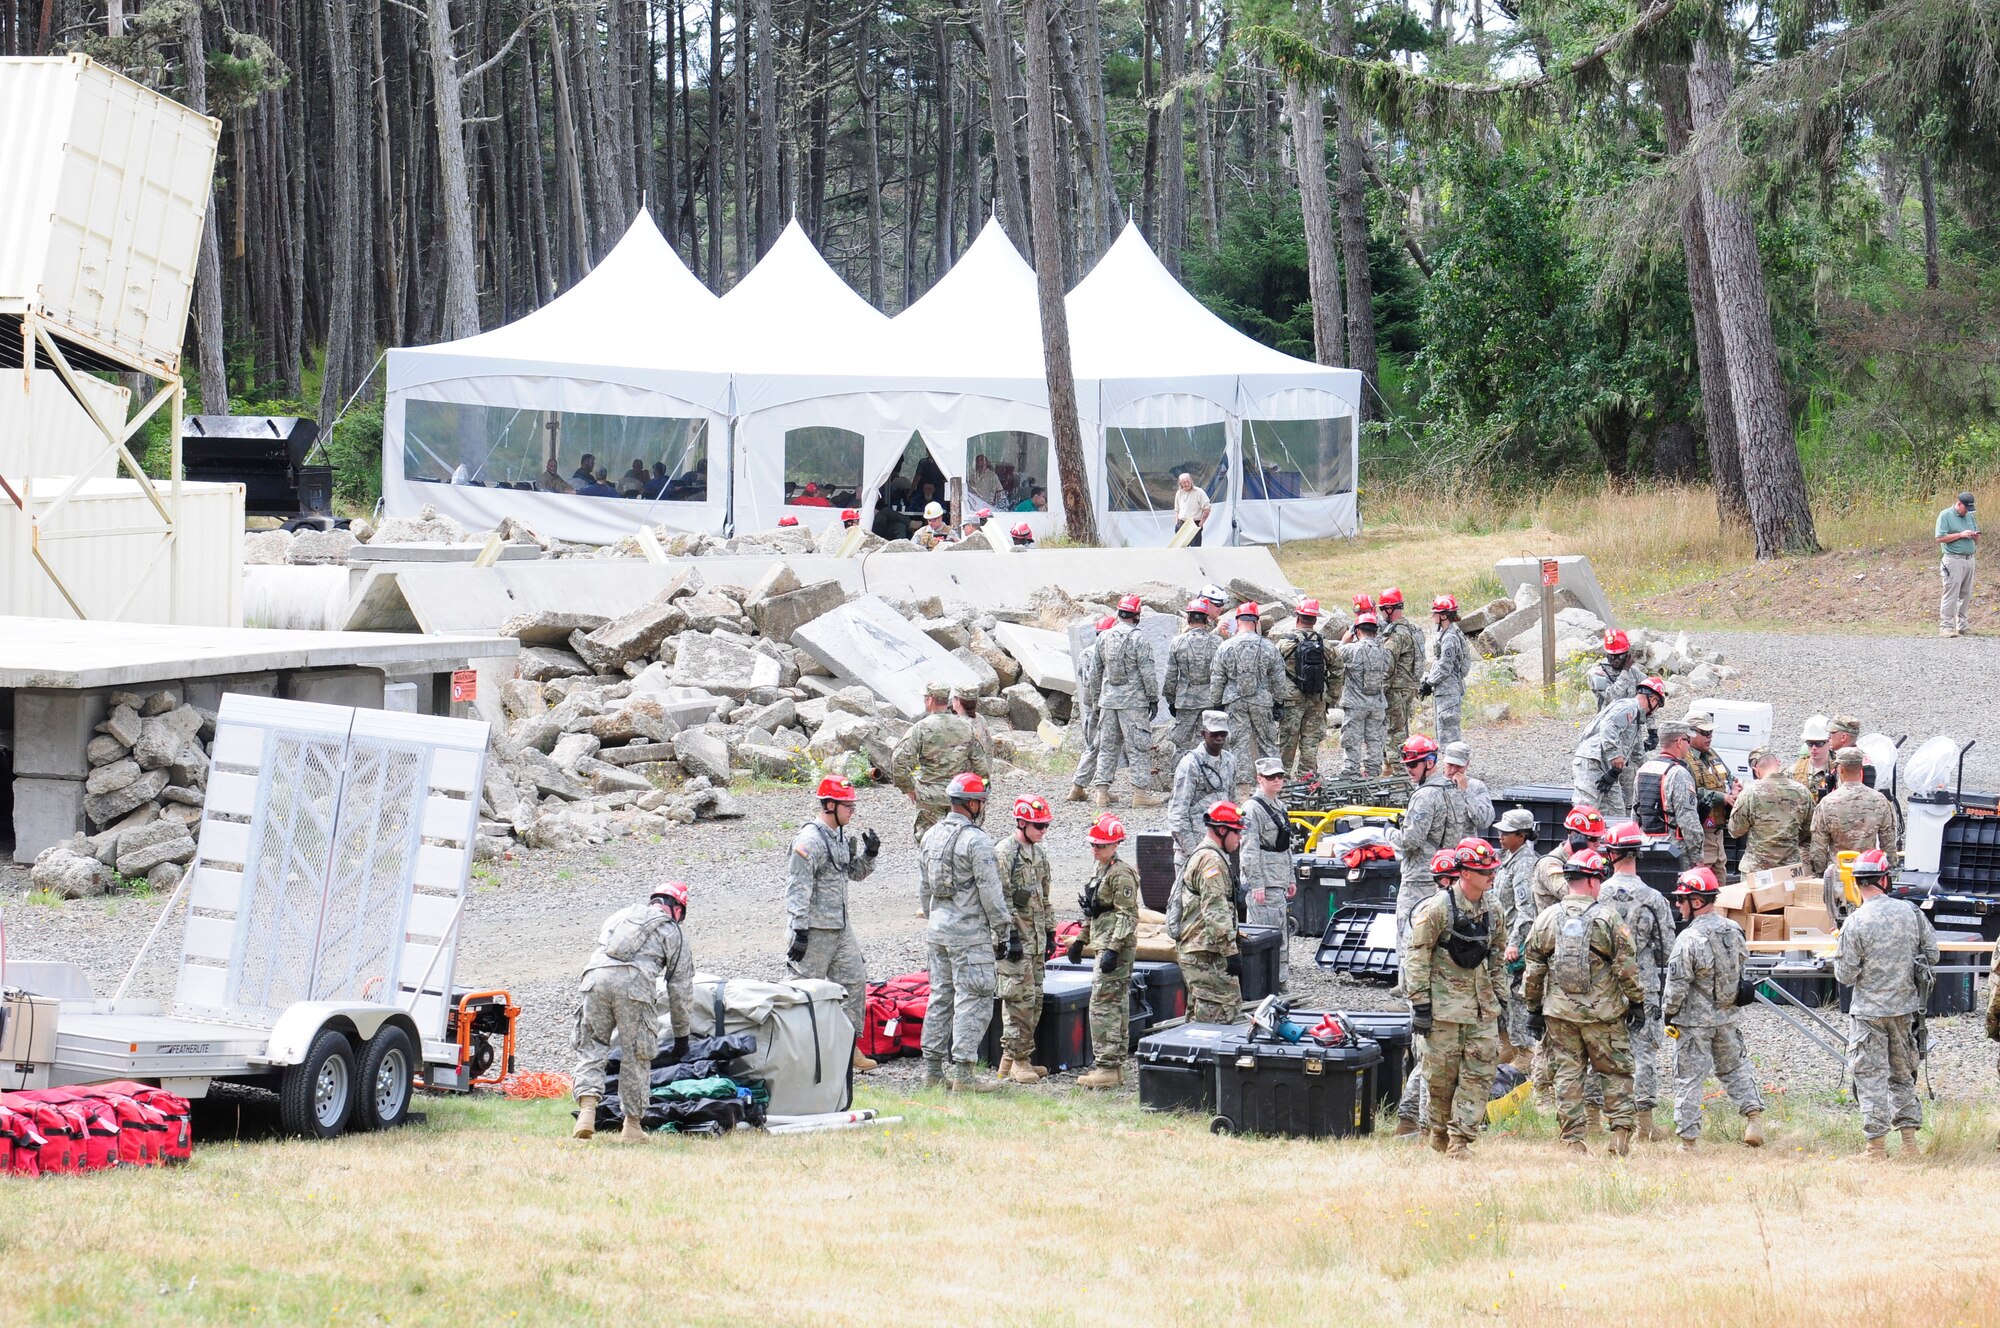 U.S. Colorado National Guard Airmen and Soldiers, assigned to the 140th Wing, Buckley Air Force Base, unload equipment for a joint exercise evaluation (EXEVAL), where they will be evaluated for war time readiness at Camp Rilea in Warrenton, Oregon, on Aug.2, 2016. The EXEVAL ran for five days in a crawl, walk, run sequence, where they started off slow then transitioned into rapid response on evaluation day. (U.S. Air National Guard photo by Staff Sgt. Bobbie Reynolds) 